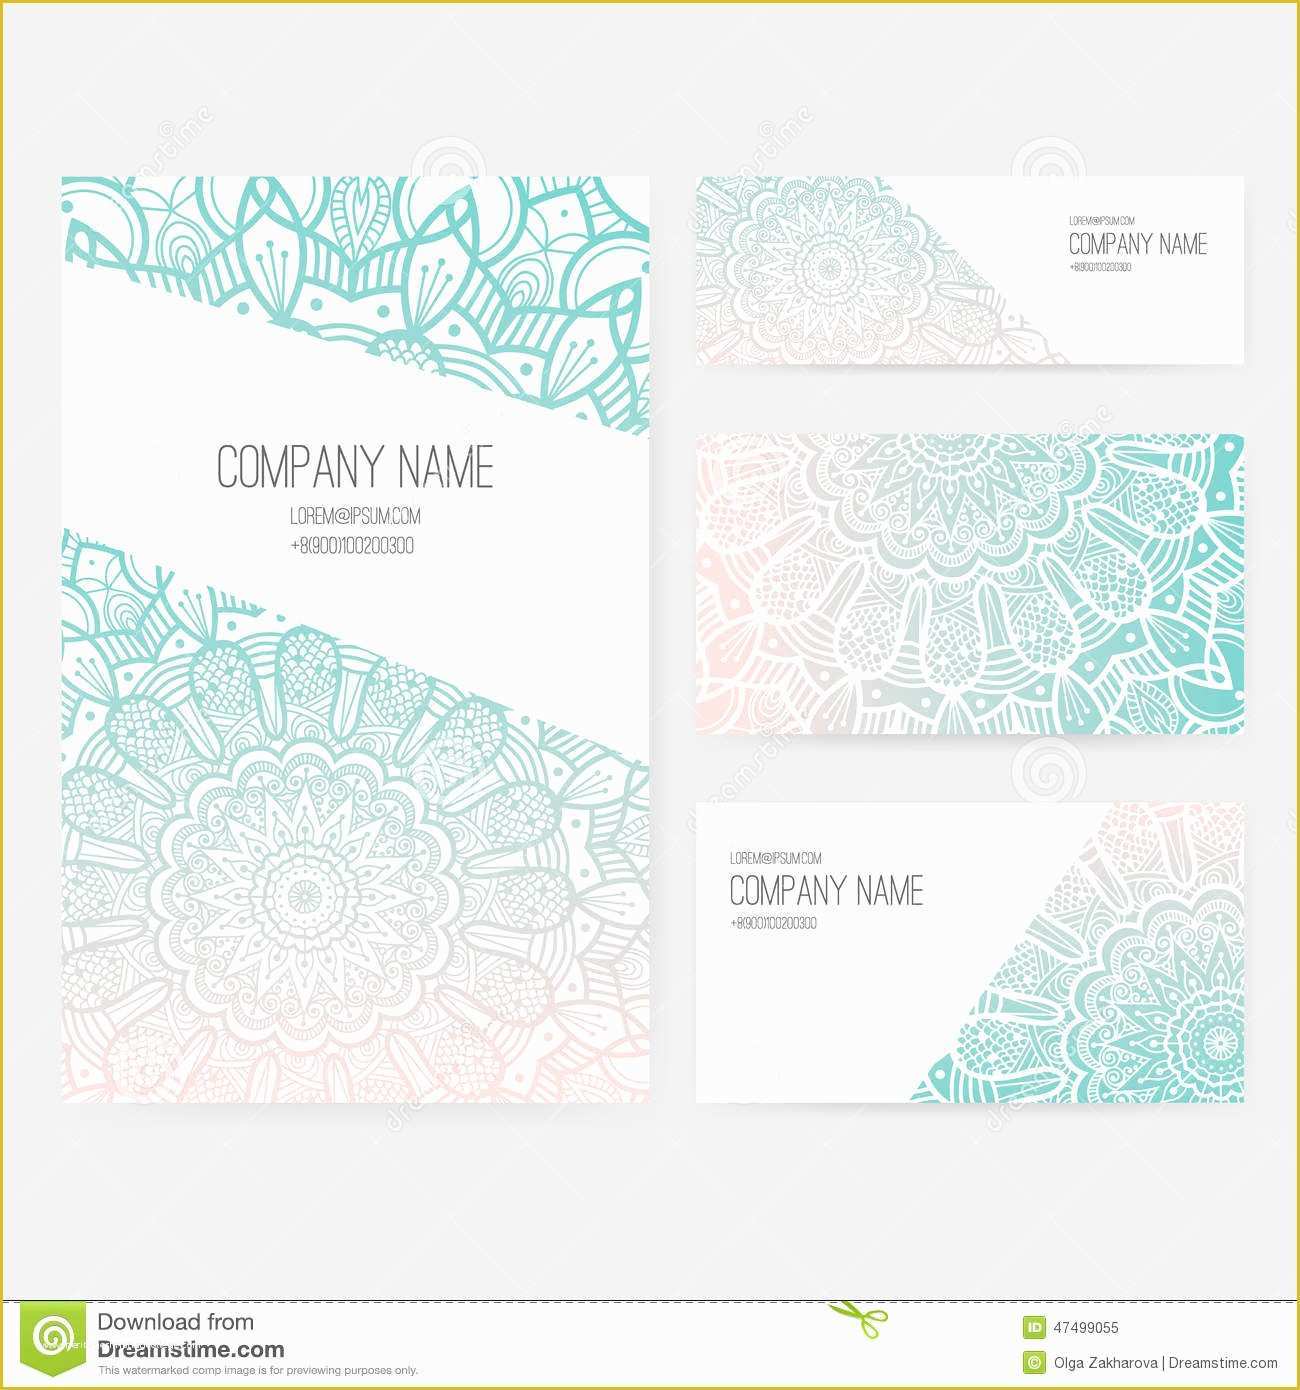 Islamic Website Templates Free Download Of Presentation Vector Kit Stock Vector Image